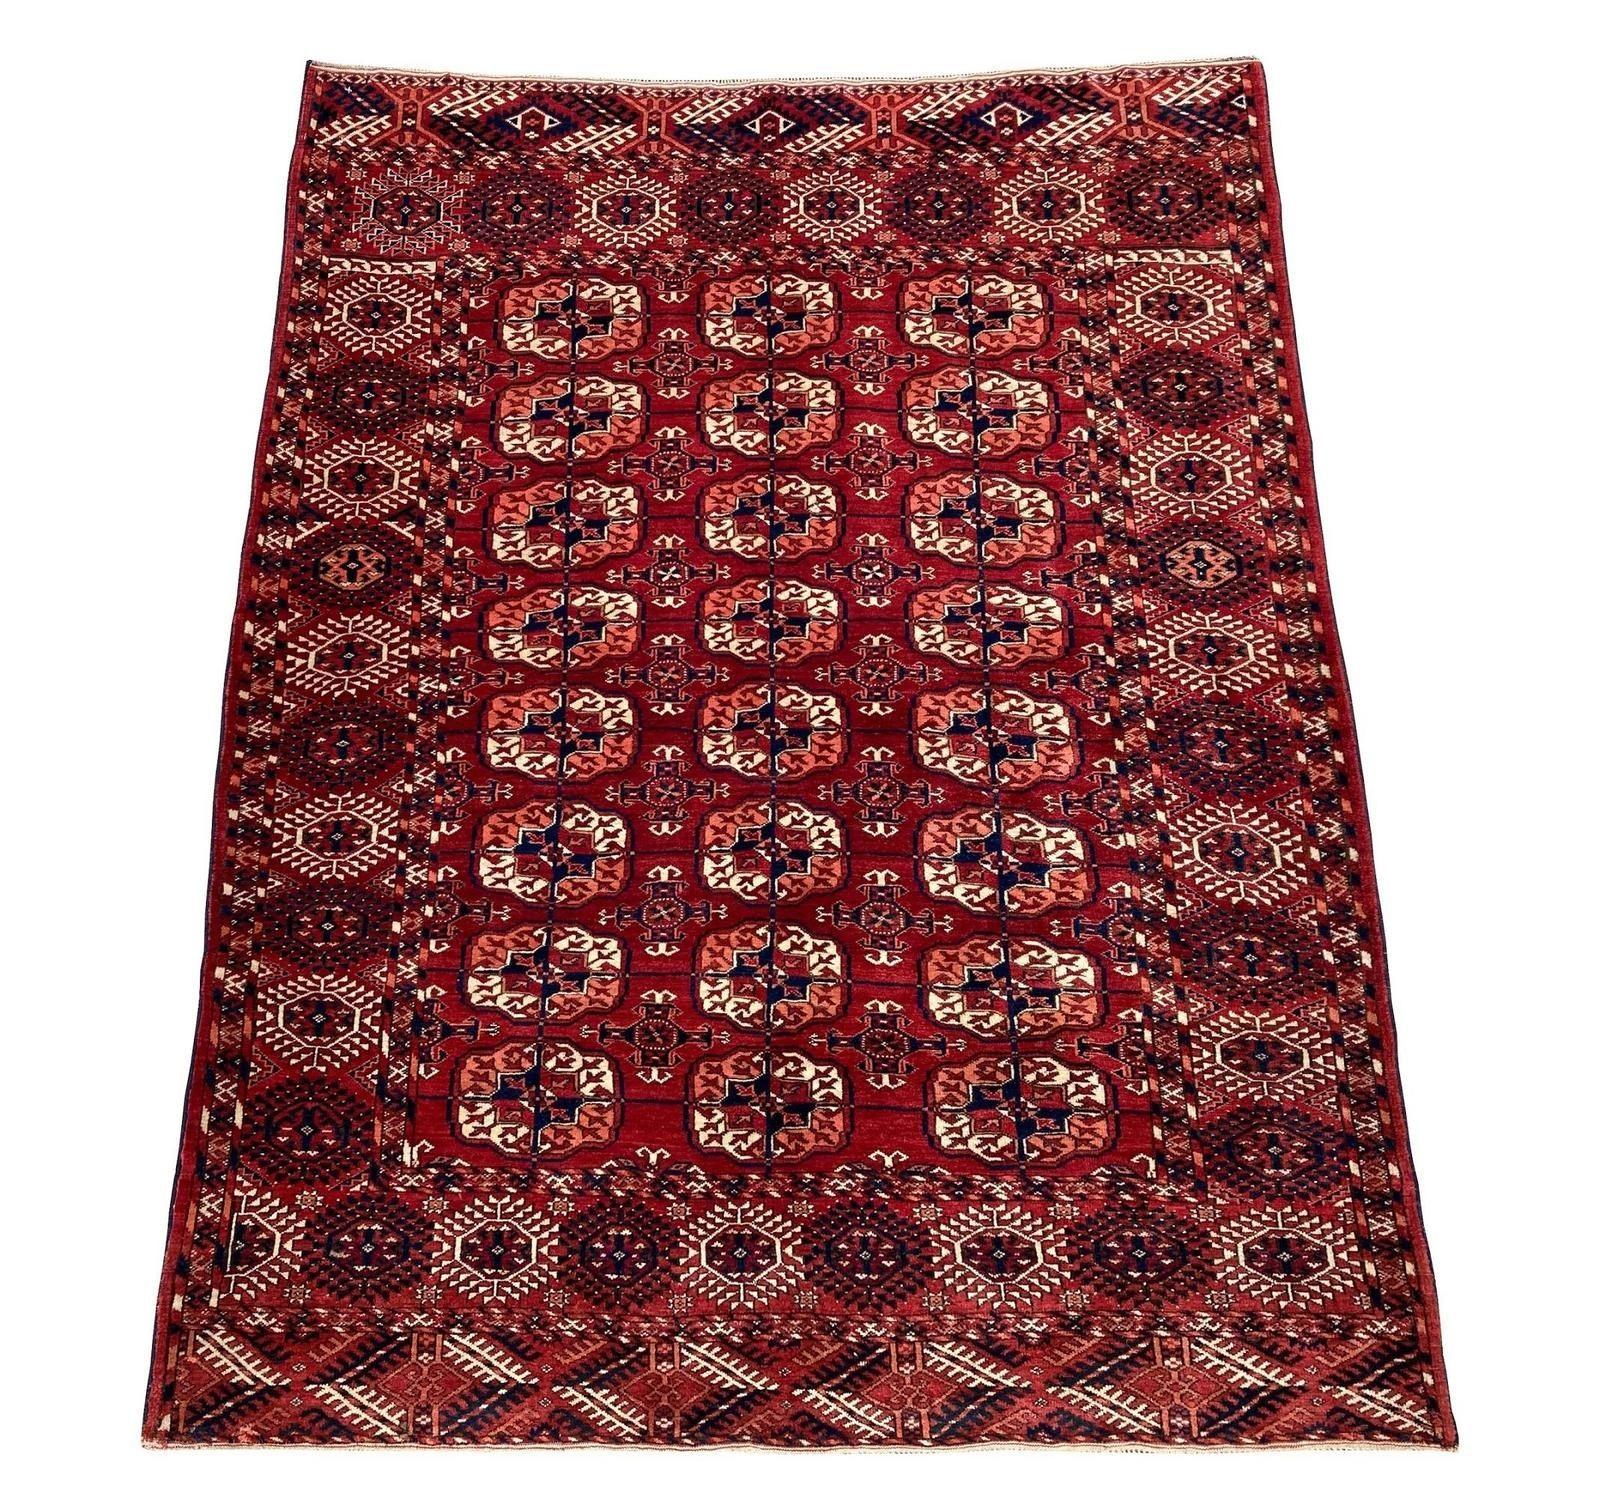 A lovely Tekke ‘wedding’ rug, hand woven circa 1900 in Turkmenistan with a traditional Bokhara design on a soft red field. These rugs were traditionally woven by the bride-to-be to showcase her weaving skills to the groom and his family. Fabulous